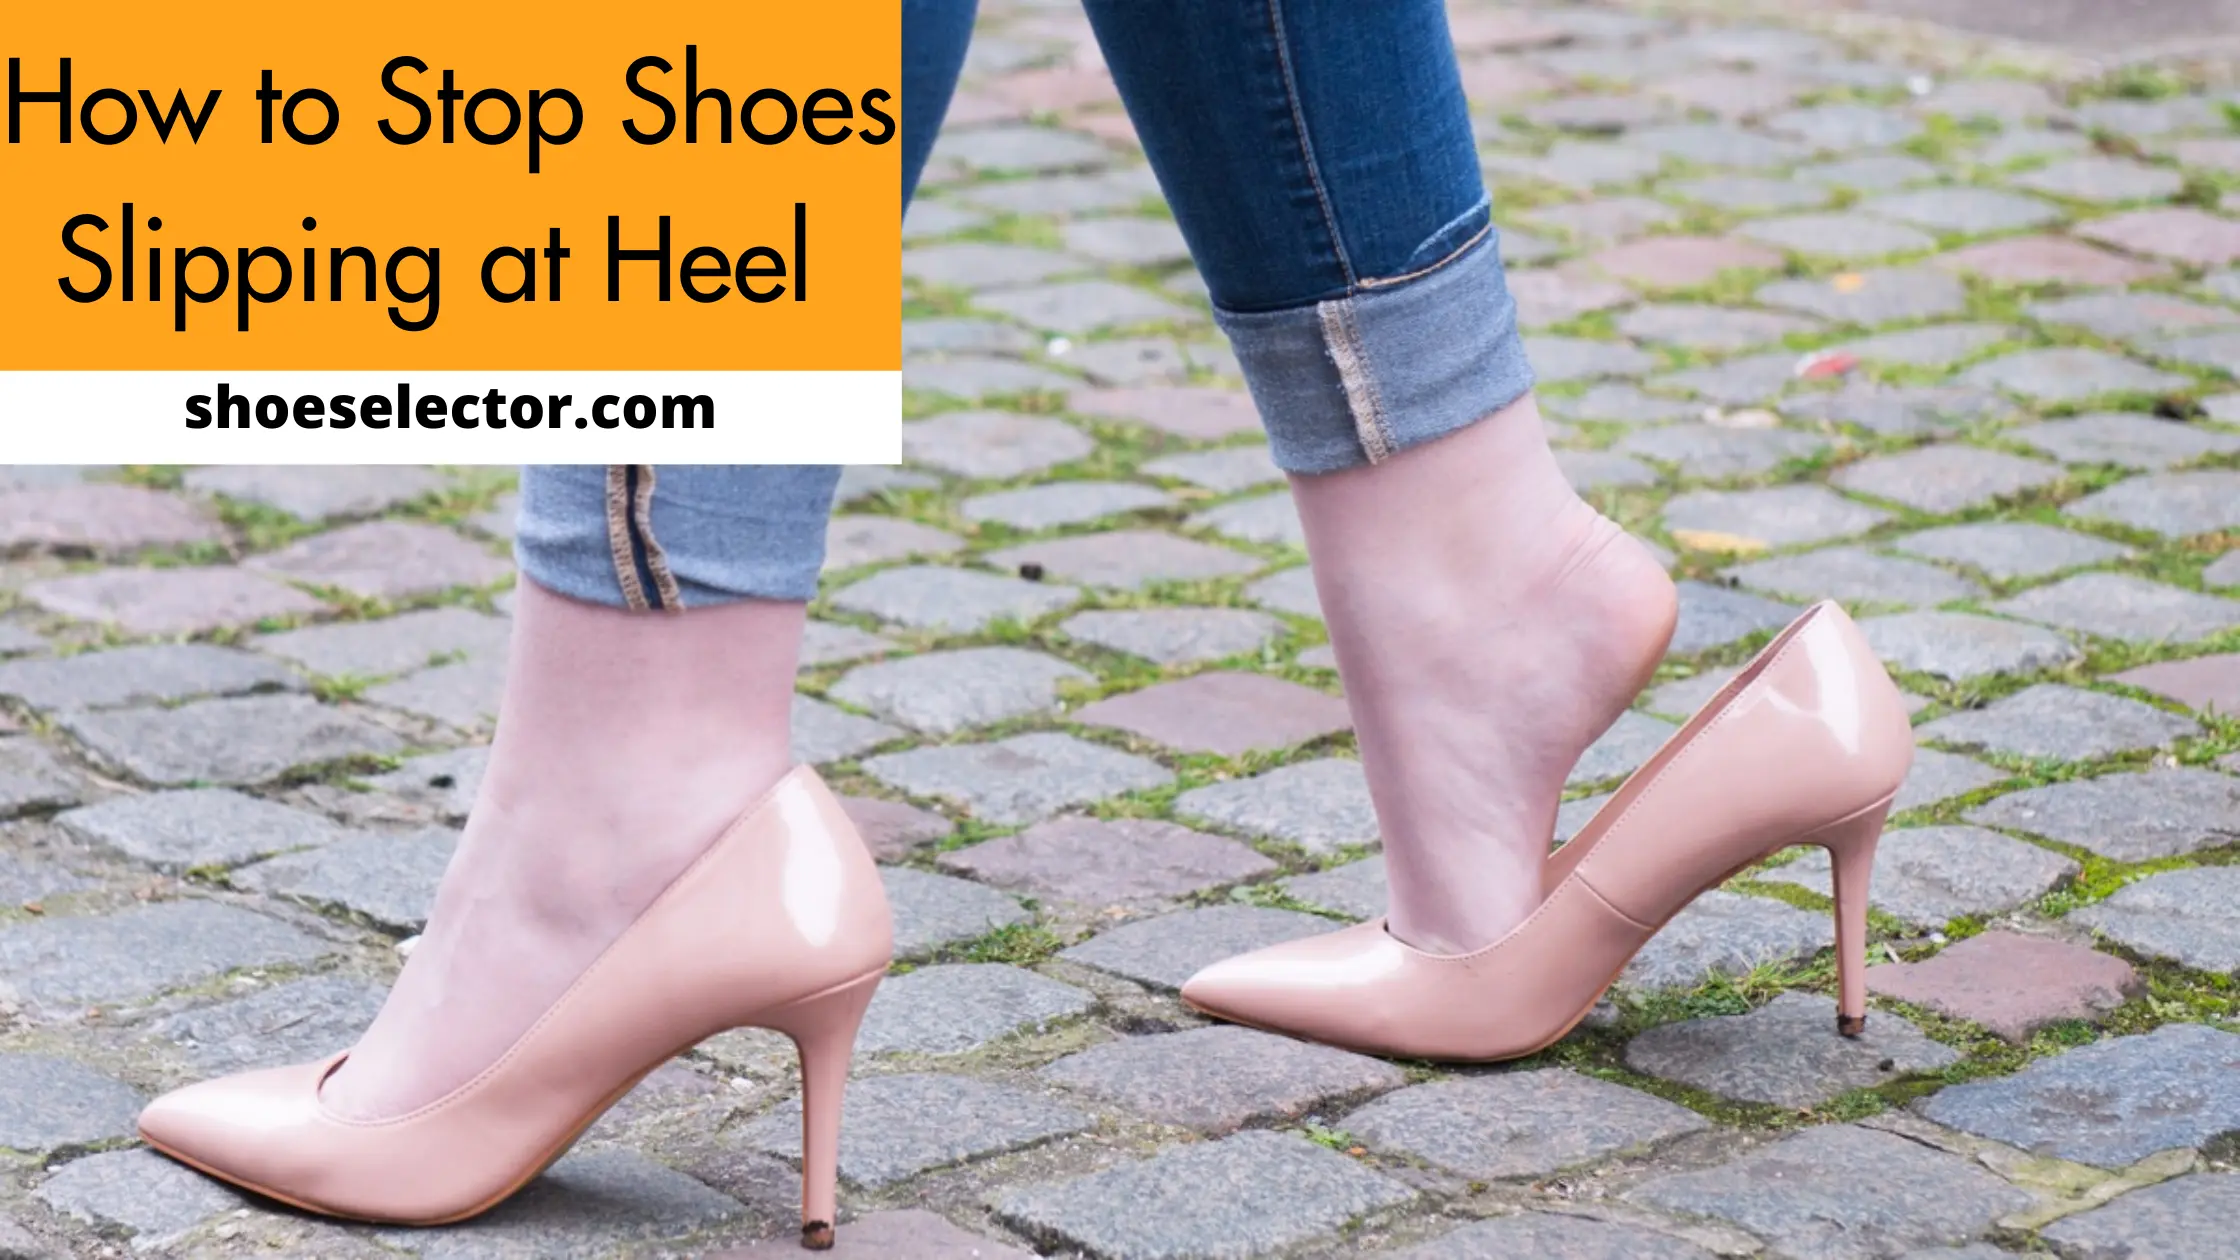 How to Stop Shoes Slipping at Heel? Step-By-Step Guide